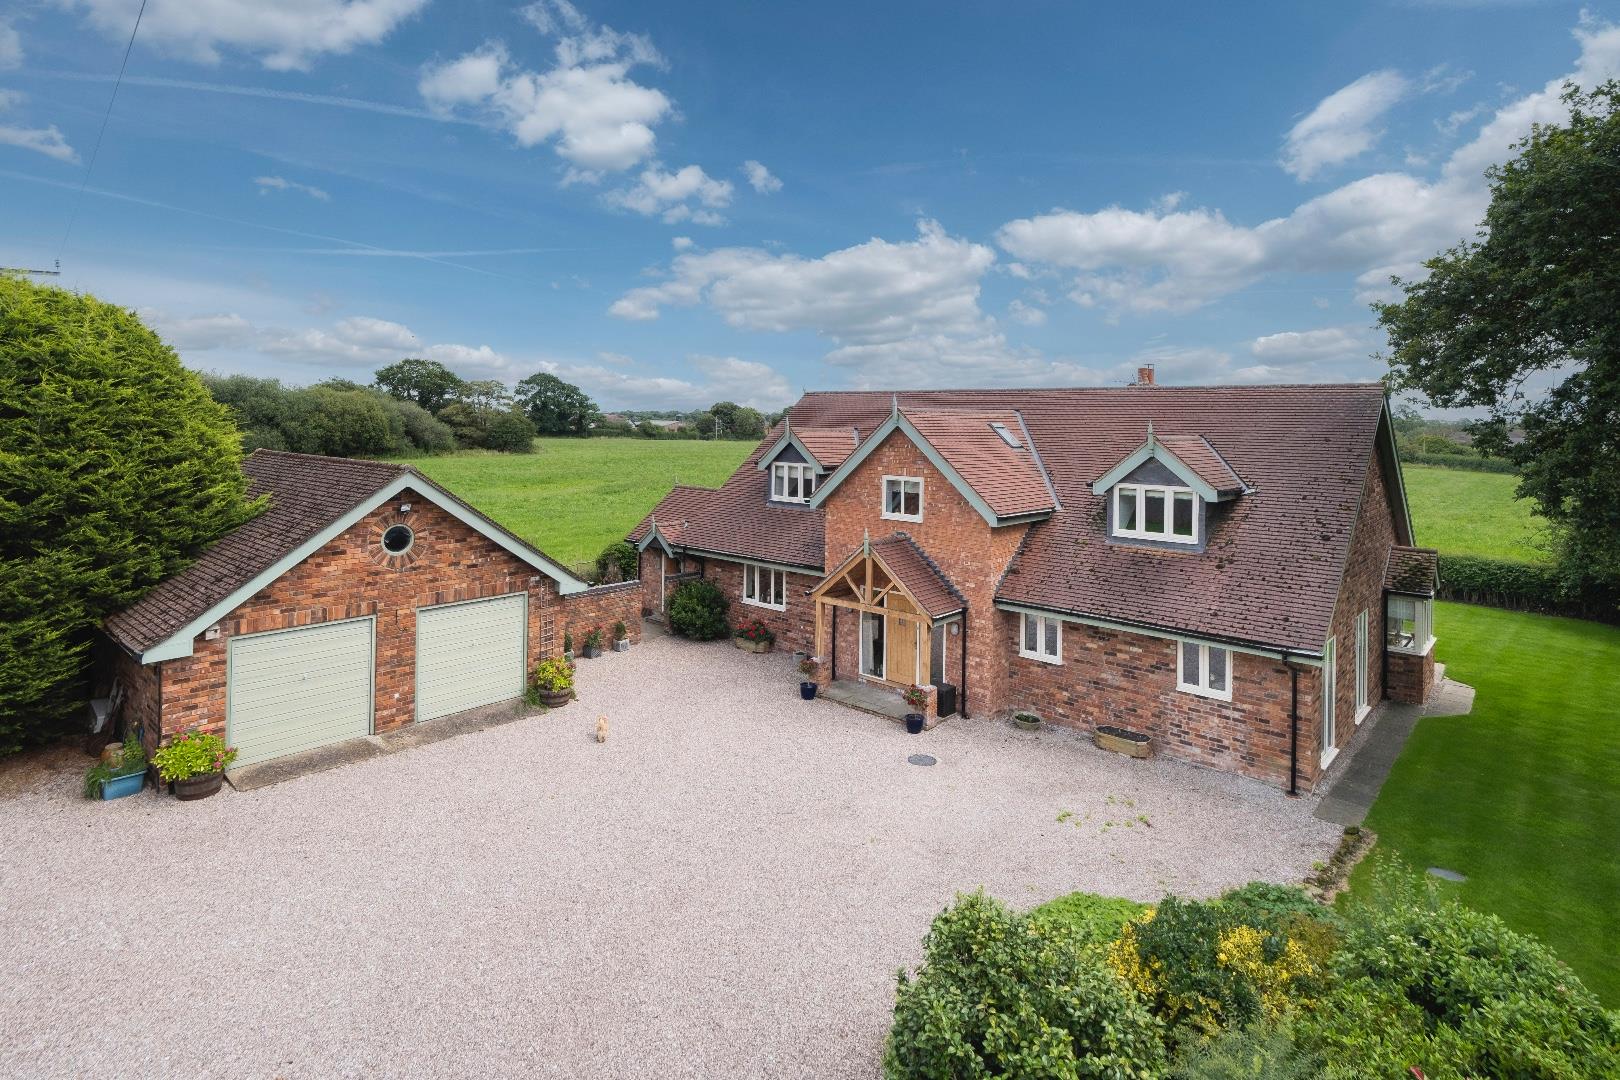 4 bedroom  Detached House for Sale in Spurstow